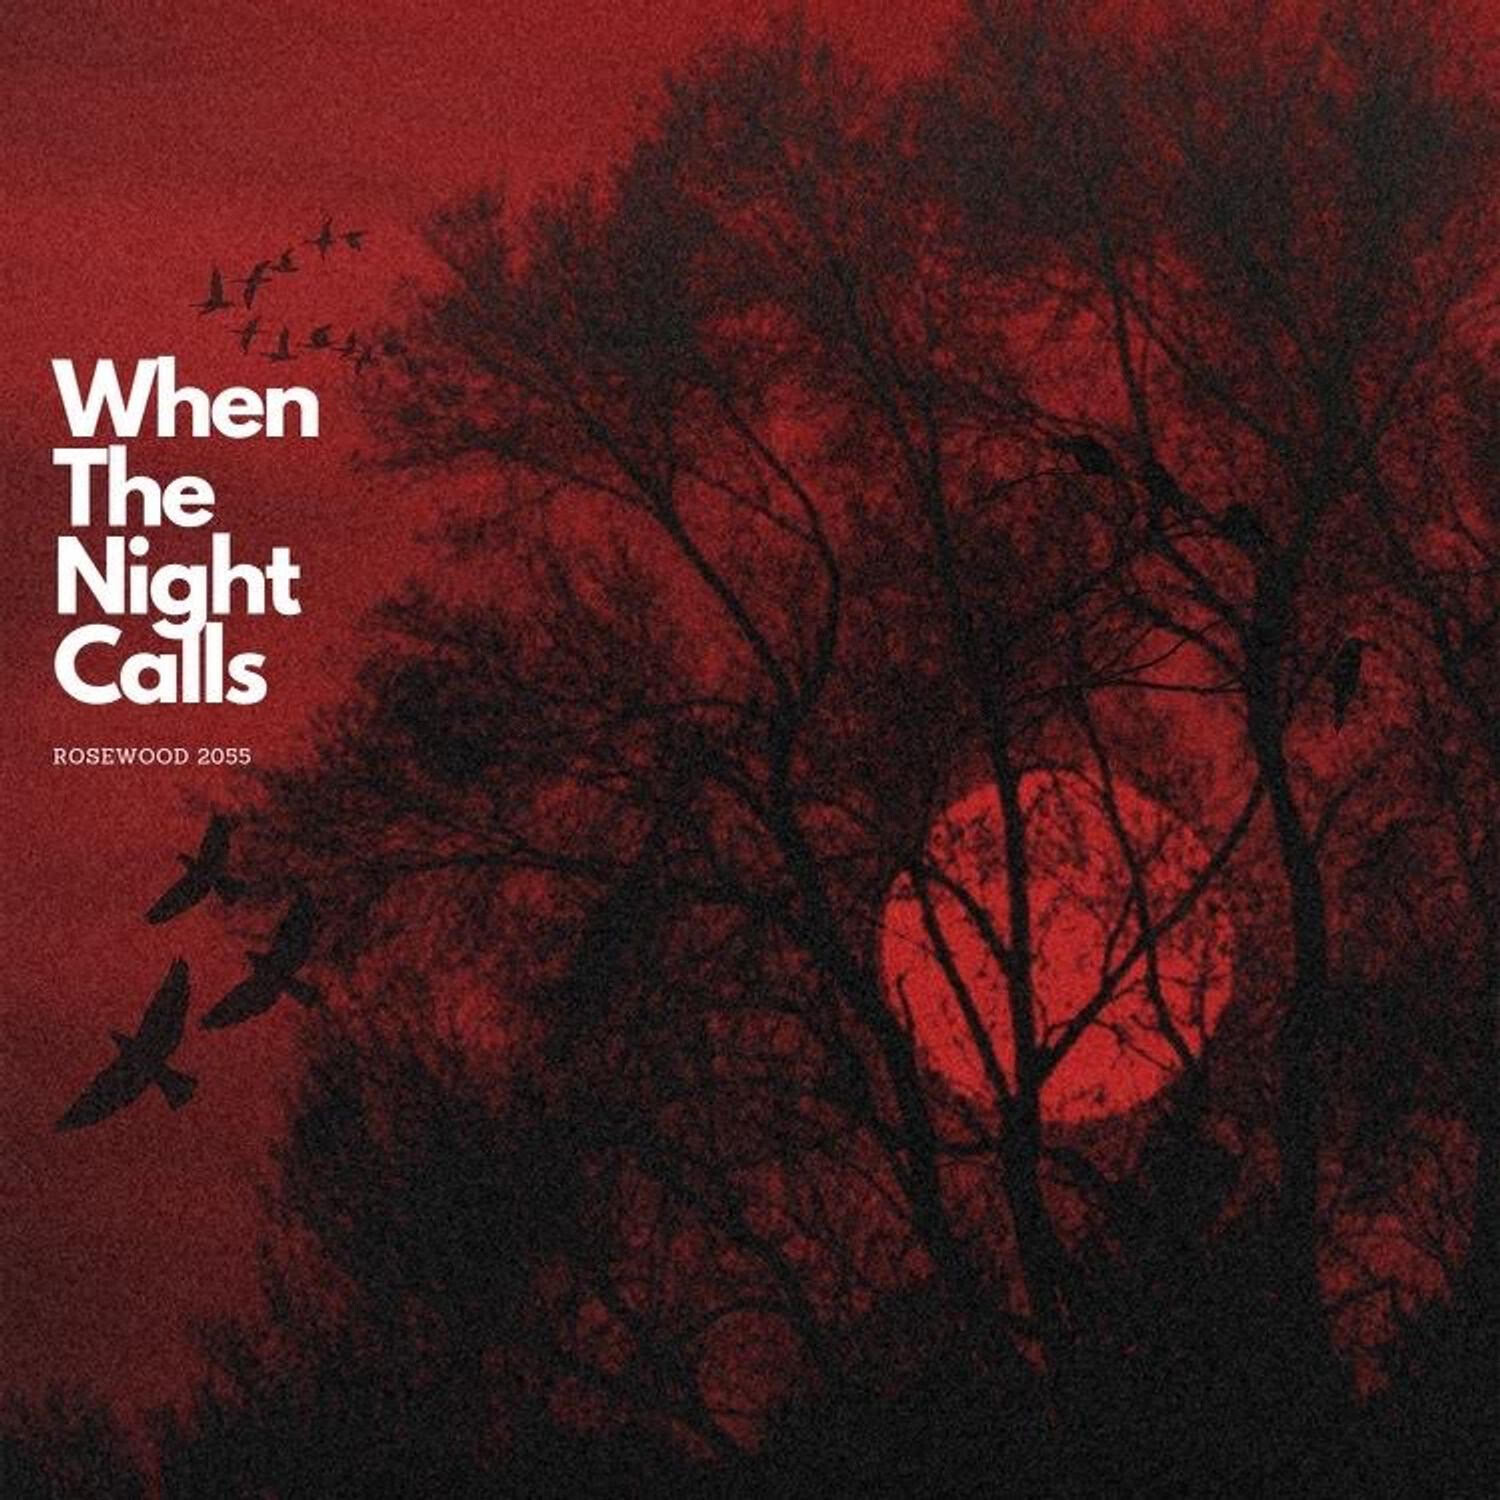 Rosewood 2055 Drop 'When The Night Calls' EP